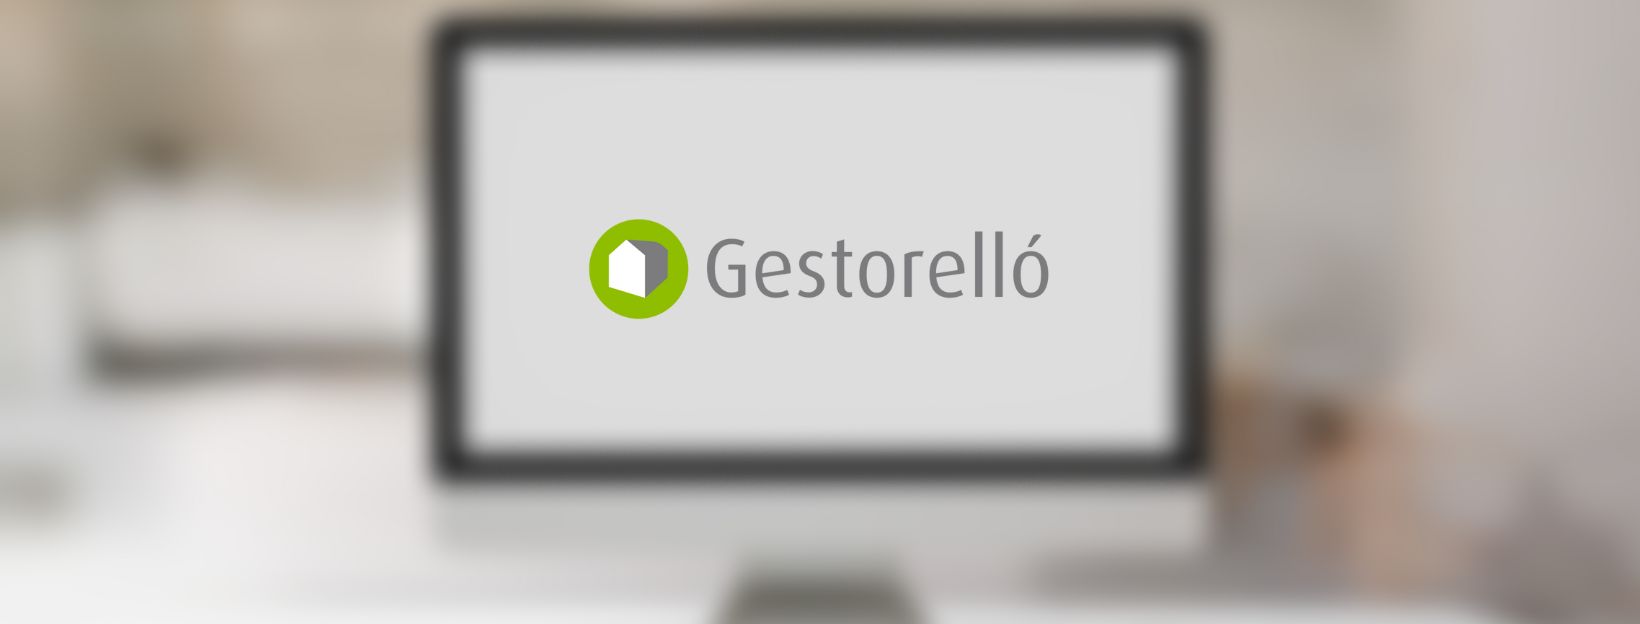 Web Page and LinkedIn Social Network Management for Gestorelló